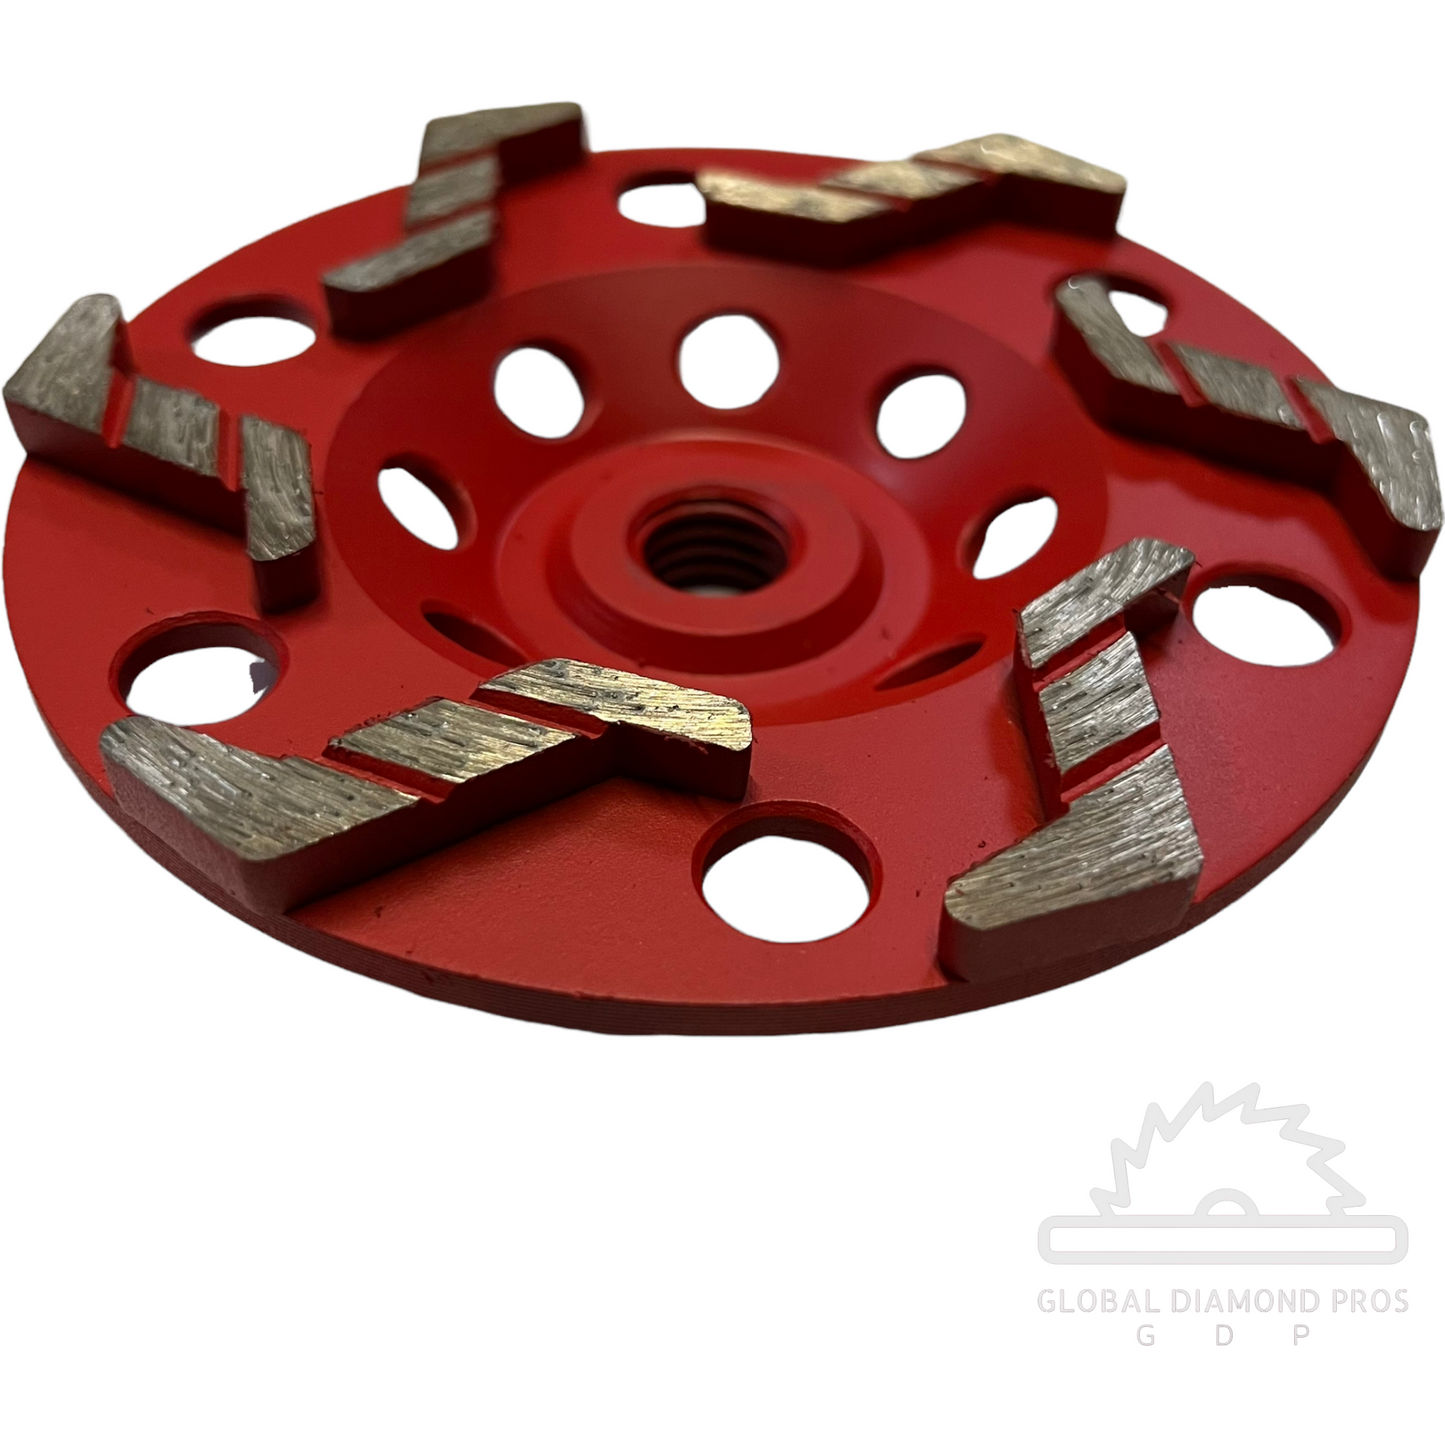 5" Xtreme Aggressive Grinding Wheel #30/40 Grit Diamond 5/8"-11 Arbor for Concrete and Paint, Epoxy, Mastic, Coating Removal